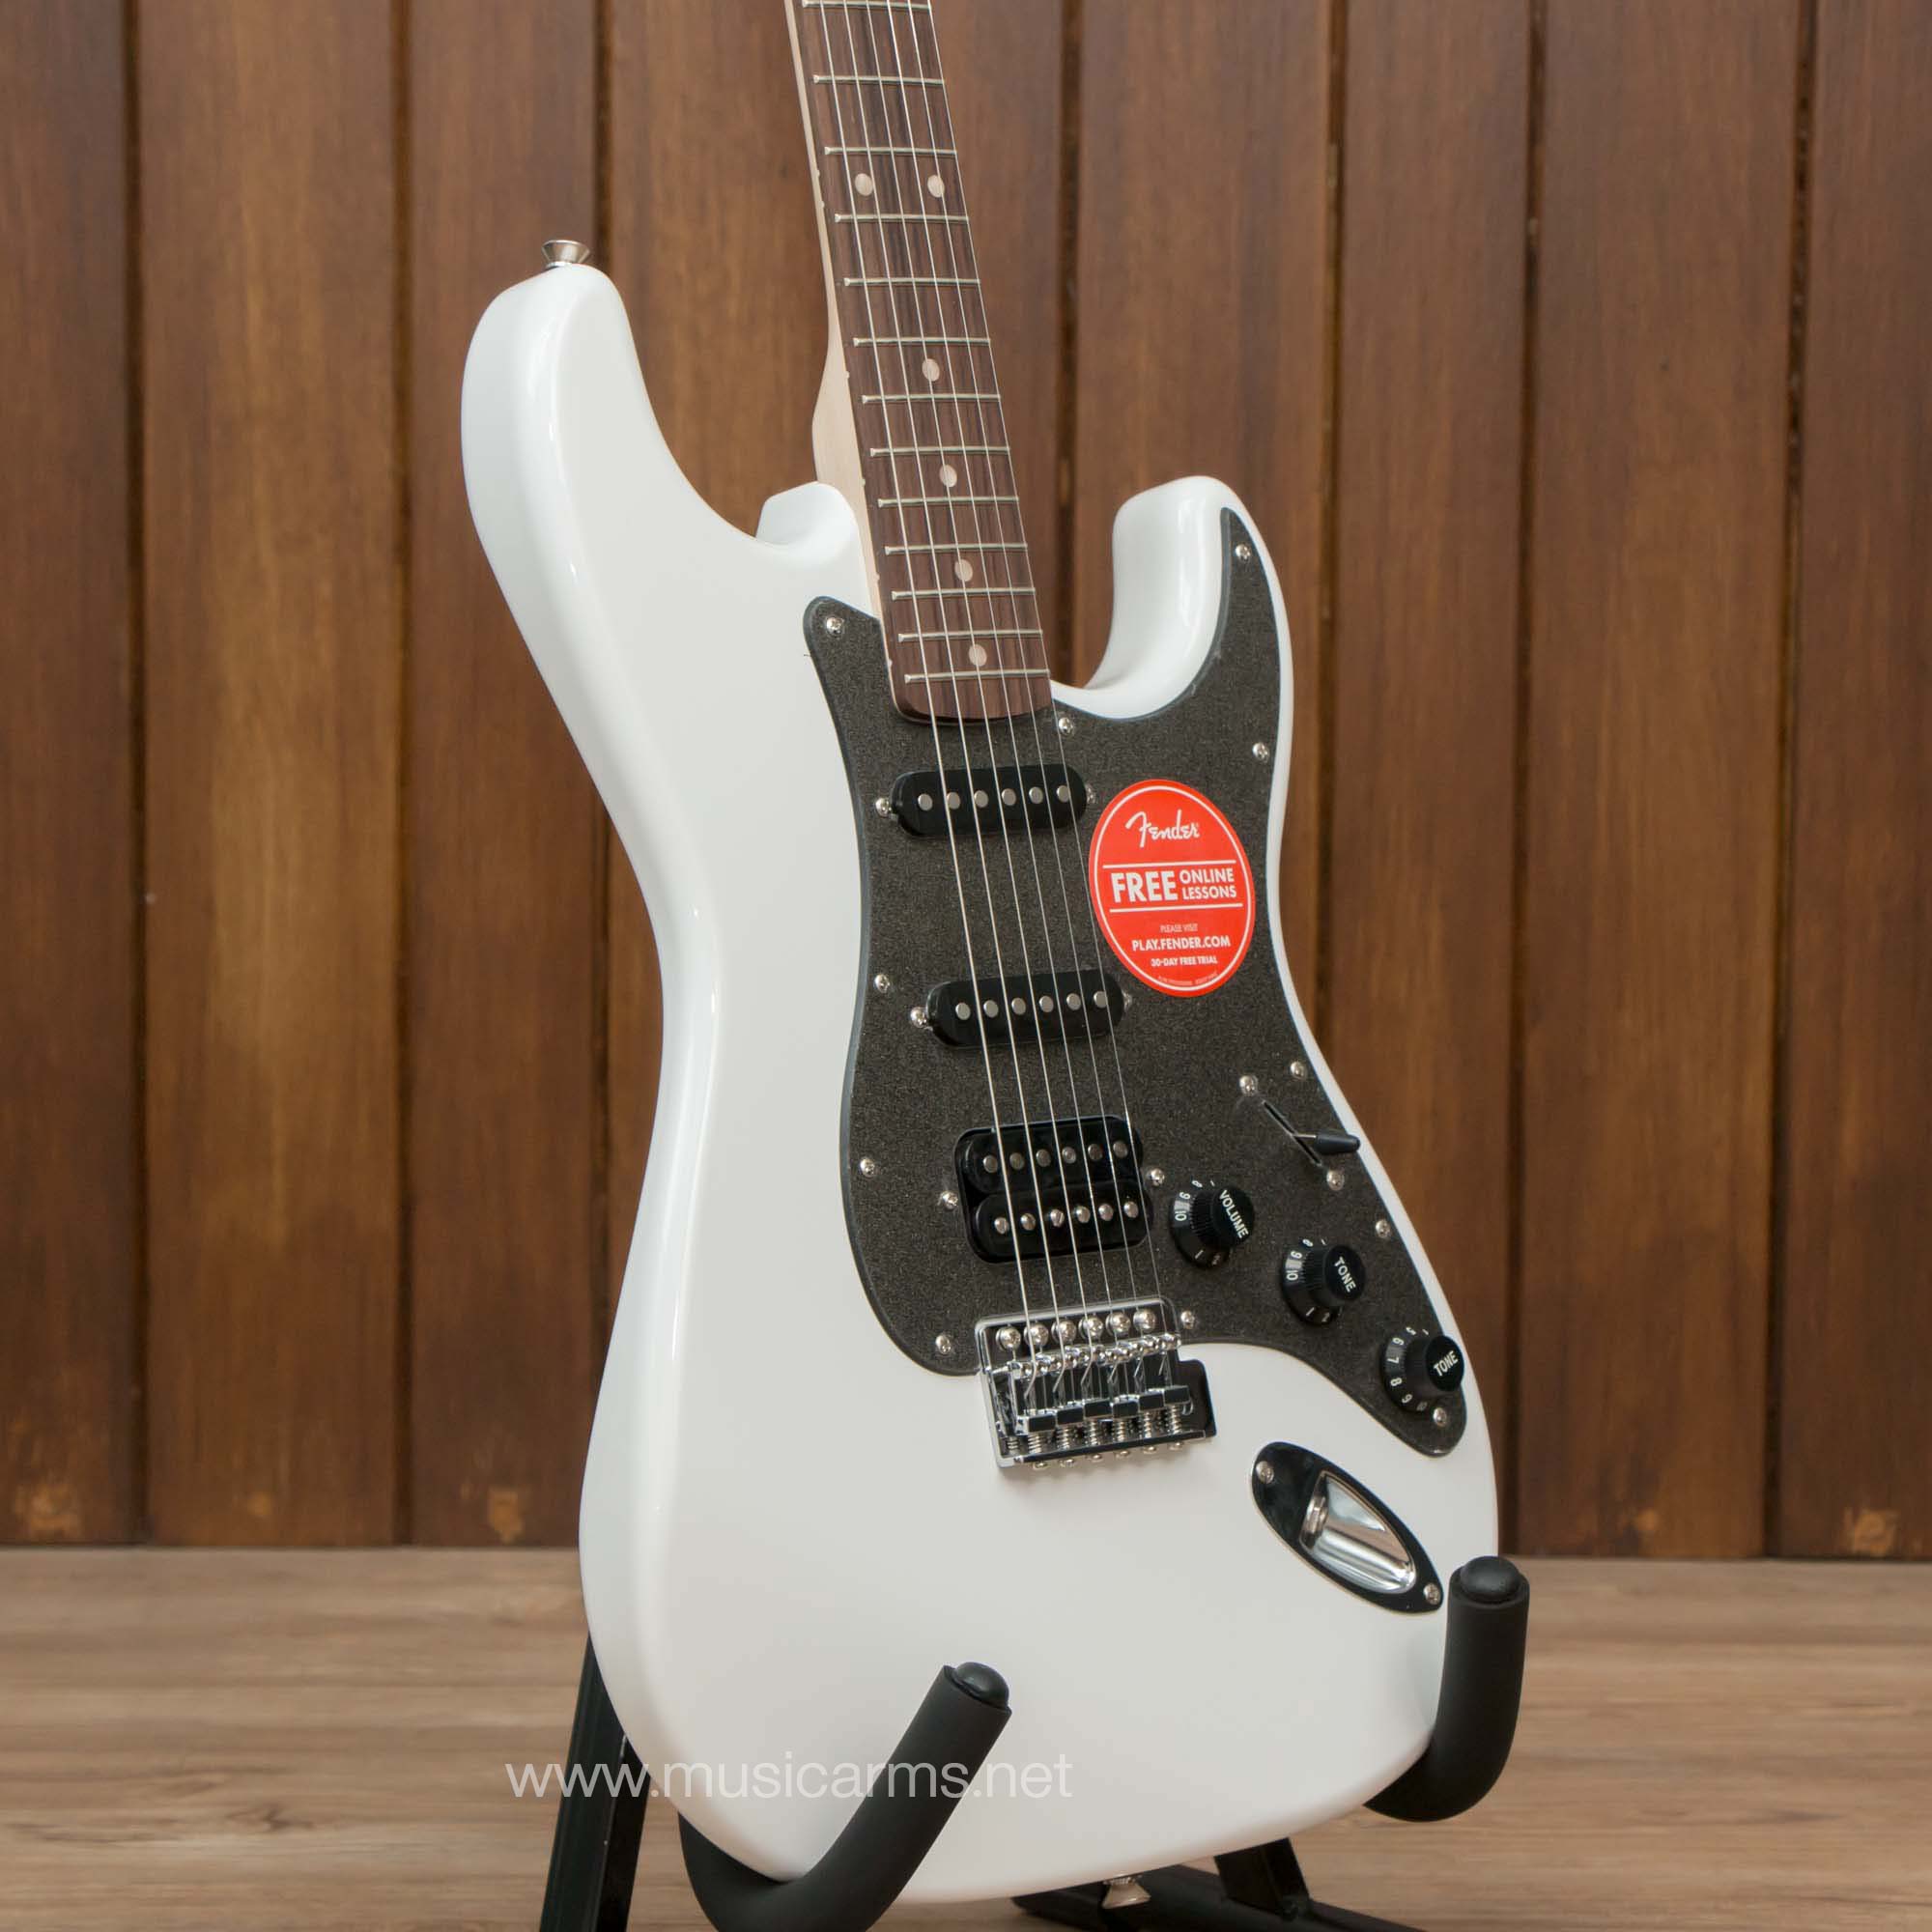 Squier stratocaster hss. Squier Affinity Stratocaster White. Squier Affinity HSS. Squier Stratocaster Affinity датчики. Squier Stratocaster Affinity HSS Indonesia.